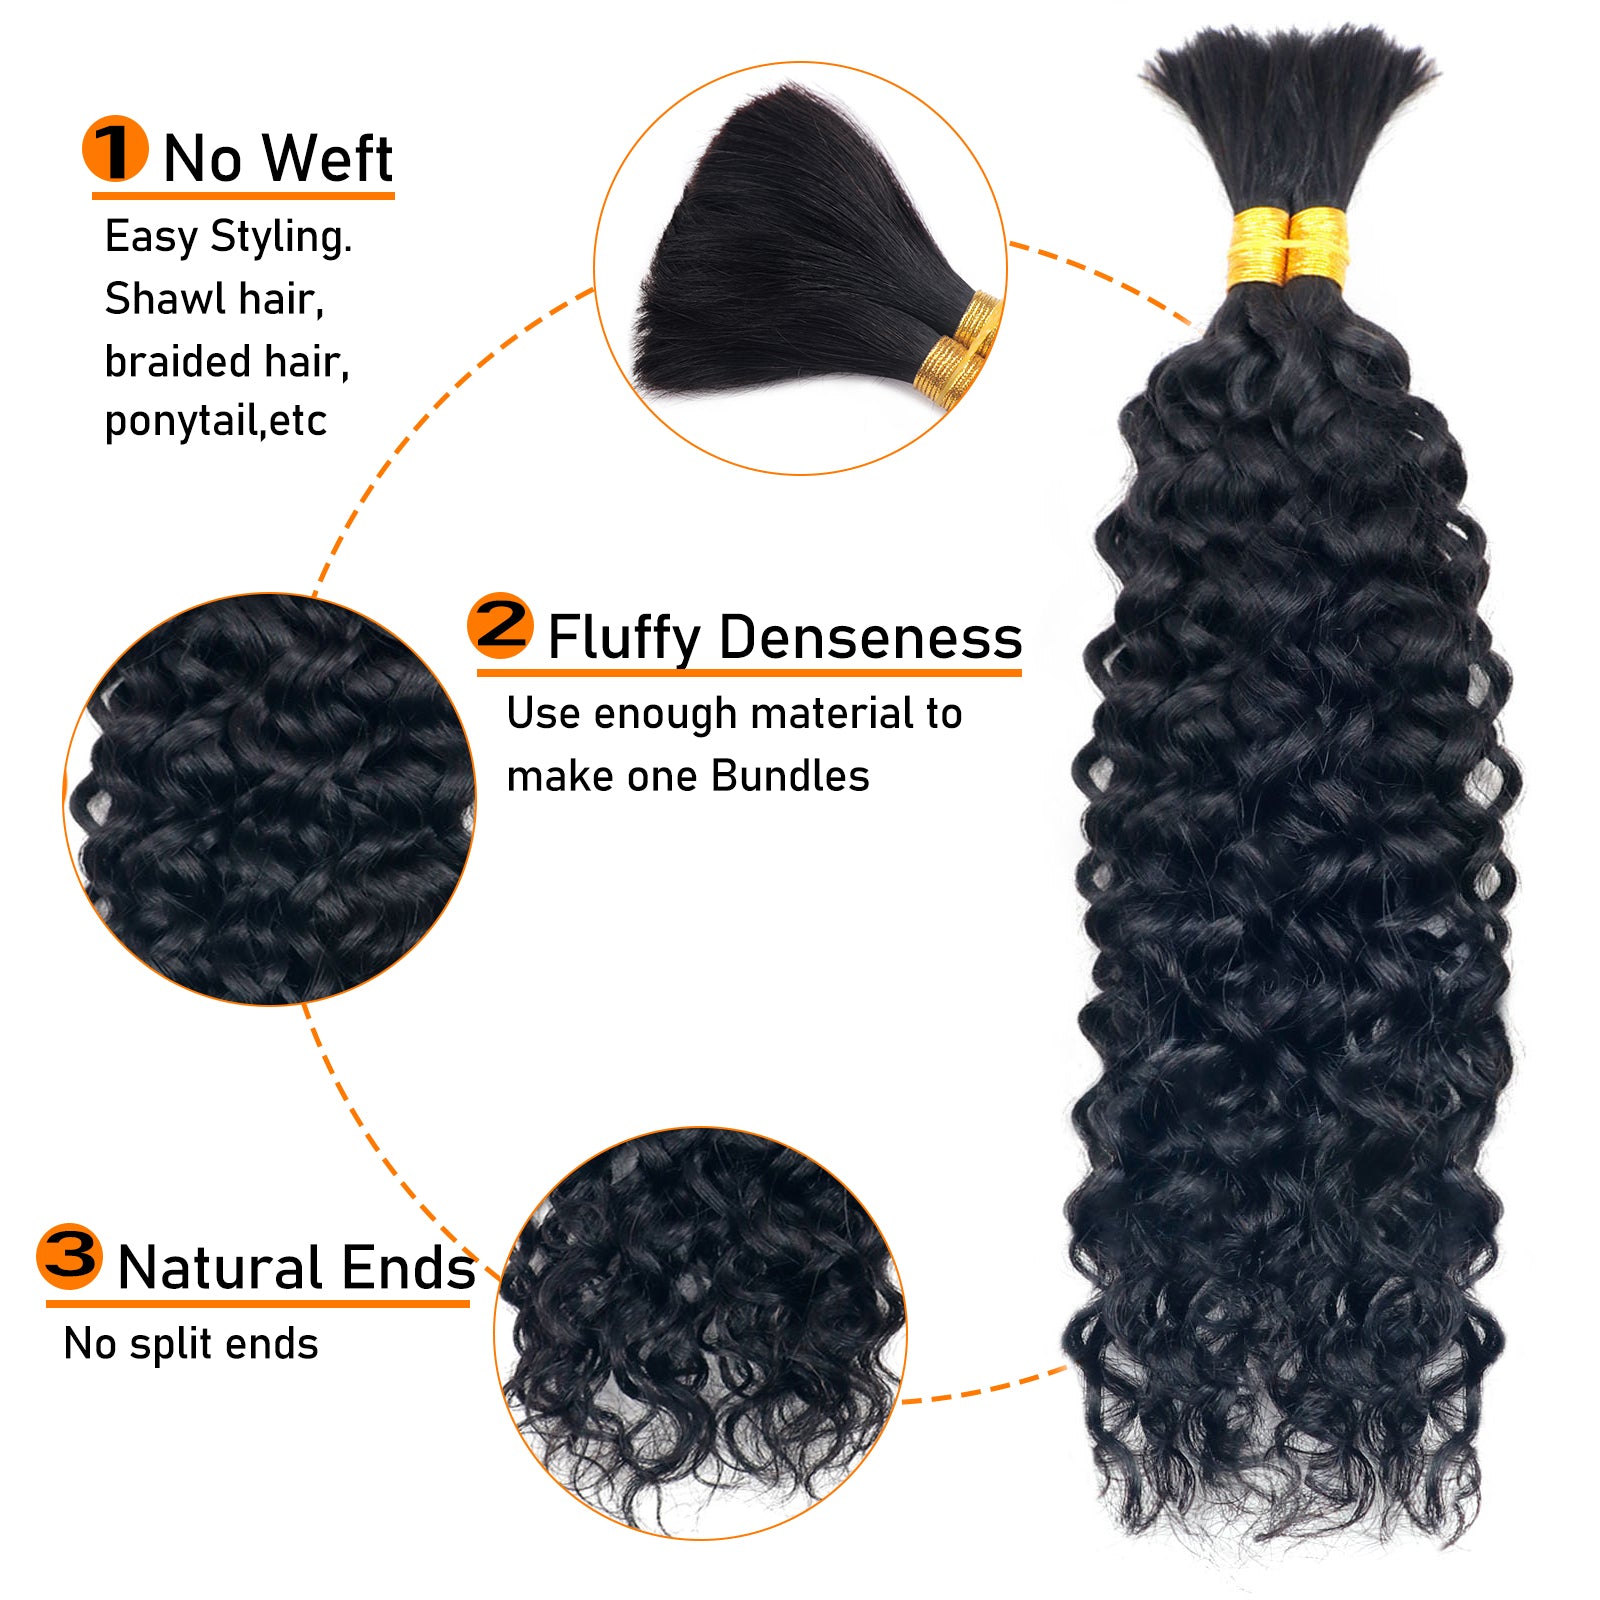 Sterly Water Wave Bulk Human Hair For Braiding No Weft 100g (1 Pack-2 Bundle 50g)